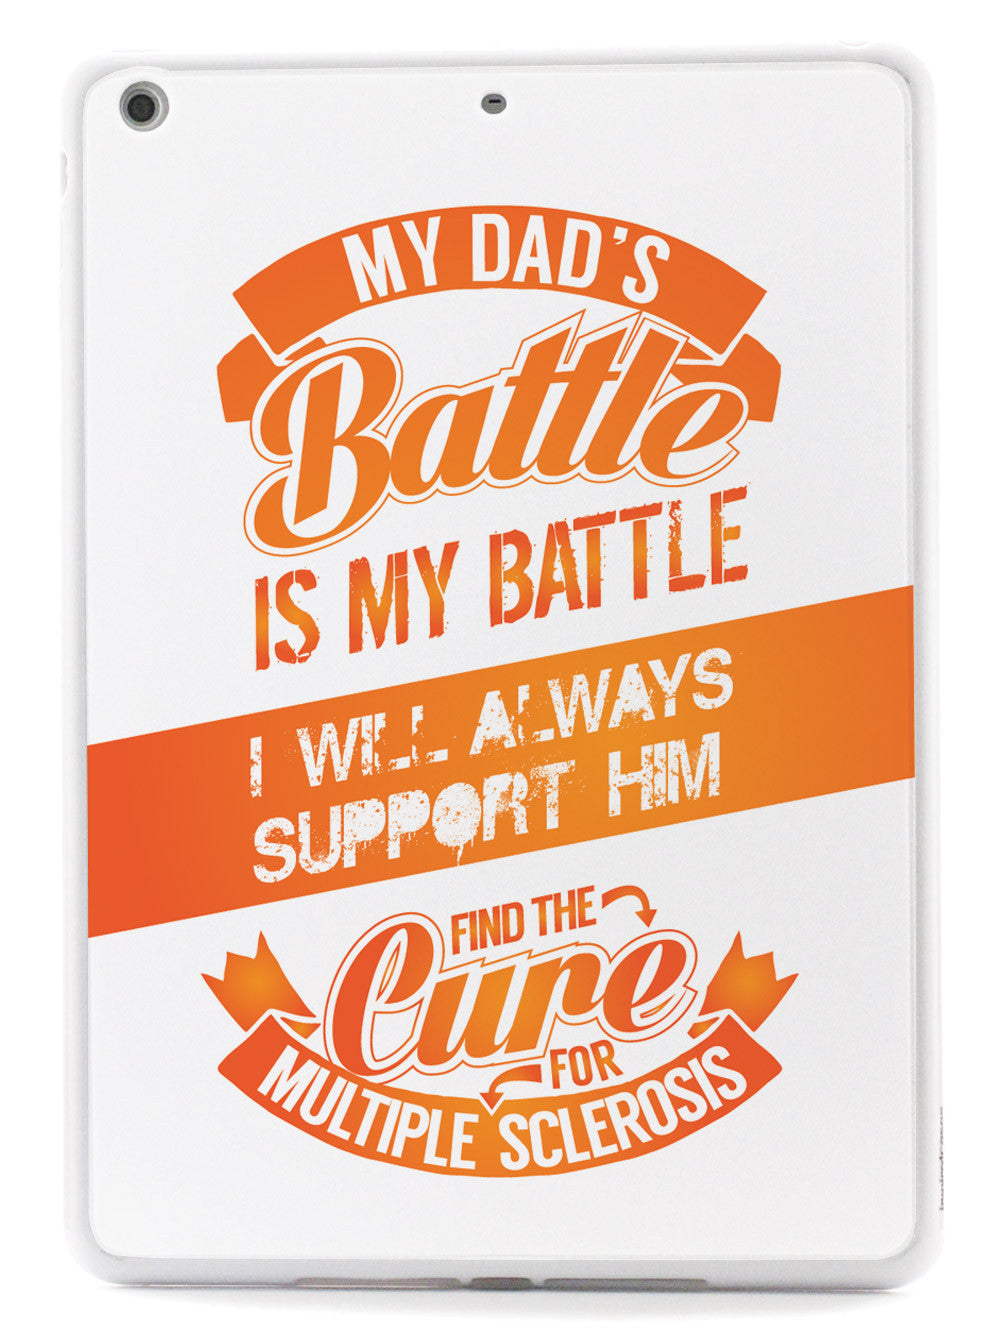 My Dad's Battle - Multiple Sclerosis Awareness/Support Case